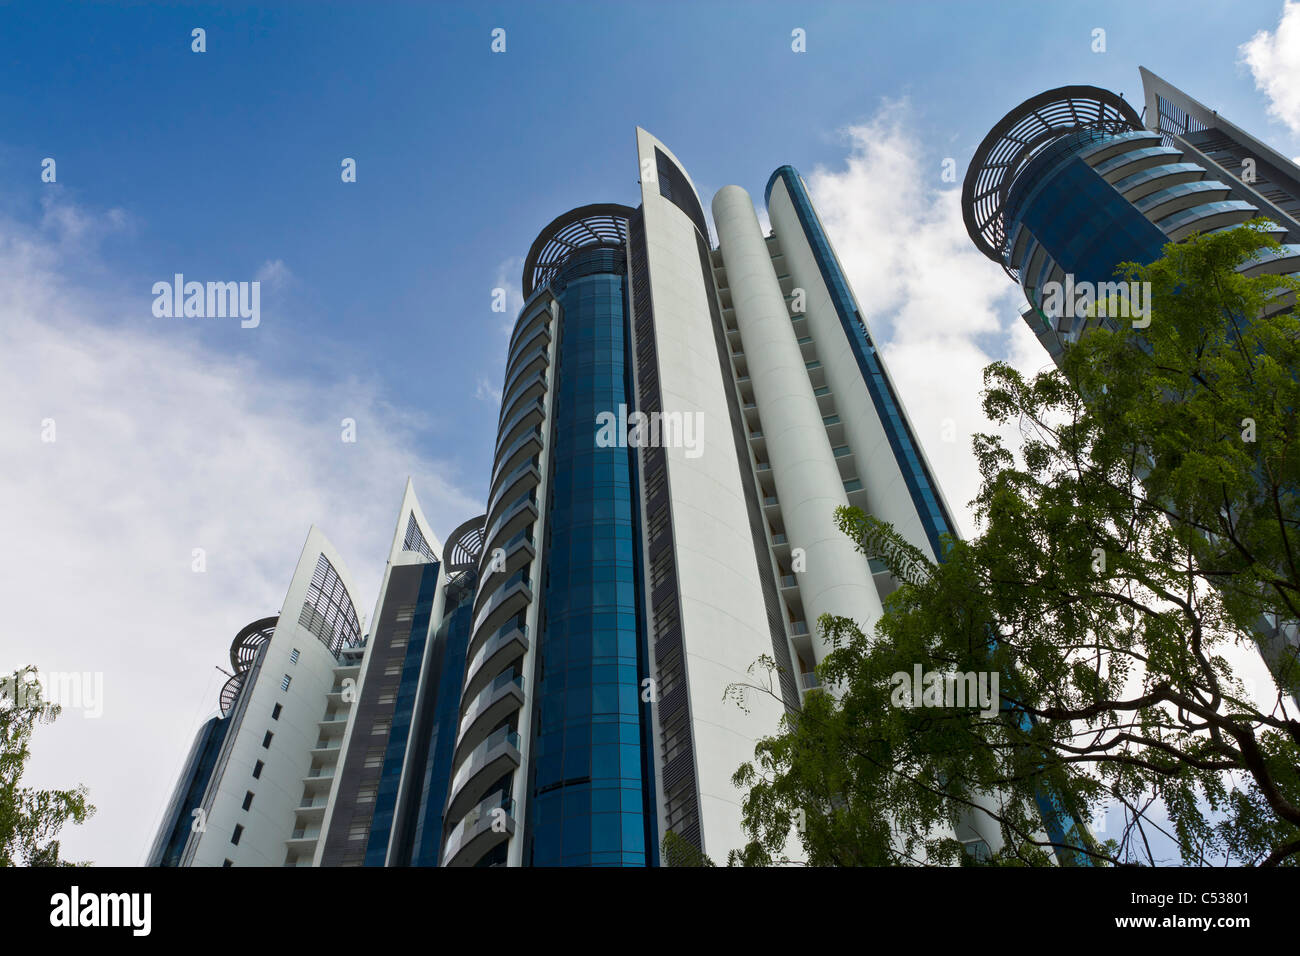 Modern residential apartment building in Singapore Stock Photo